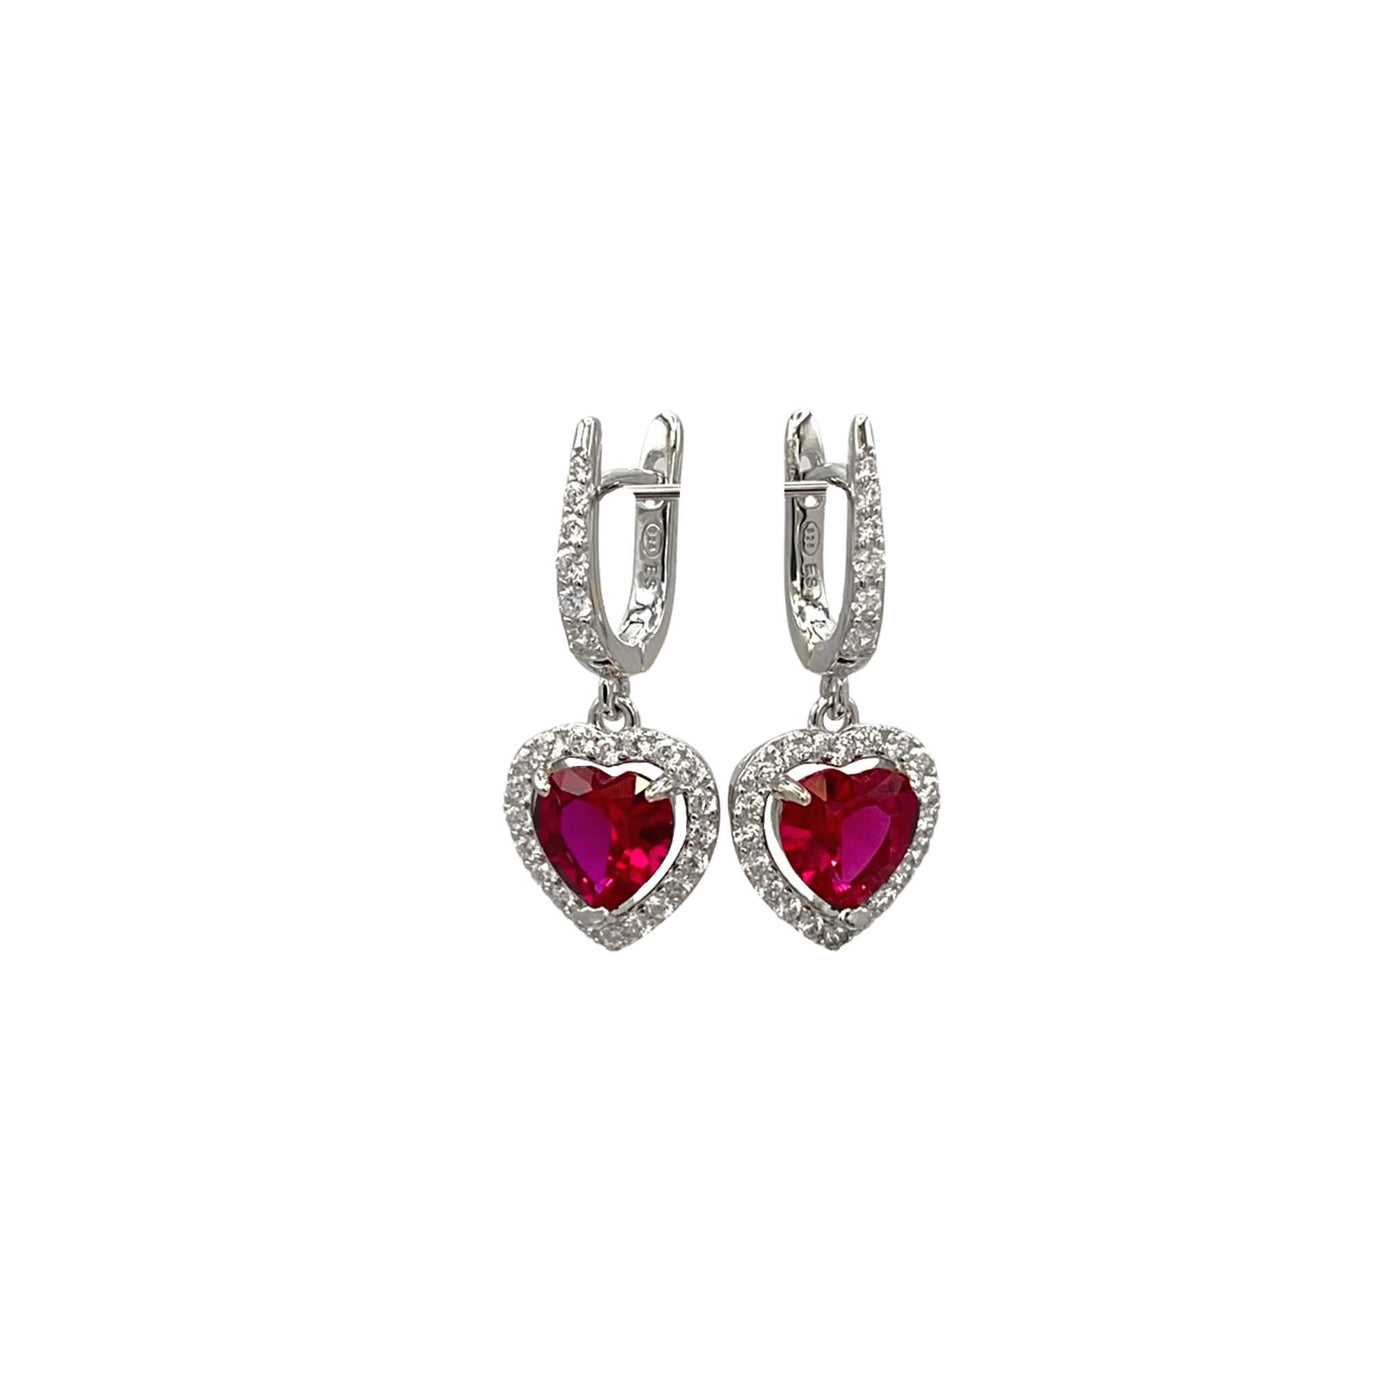 Silver hoop earrings with heart charms